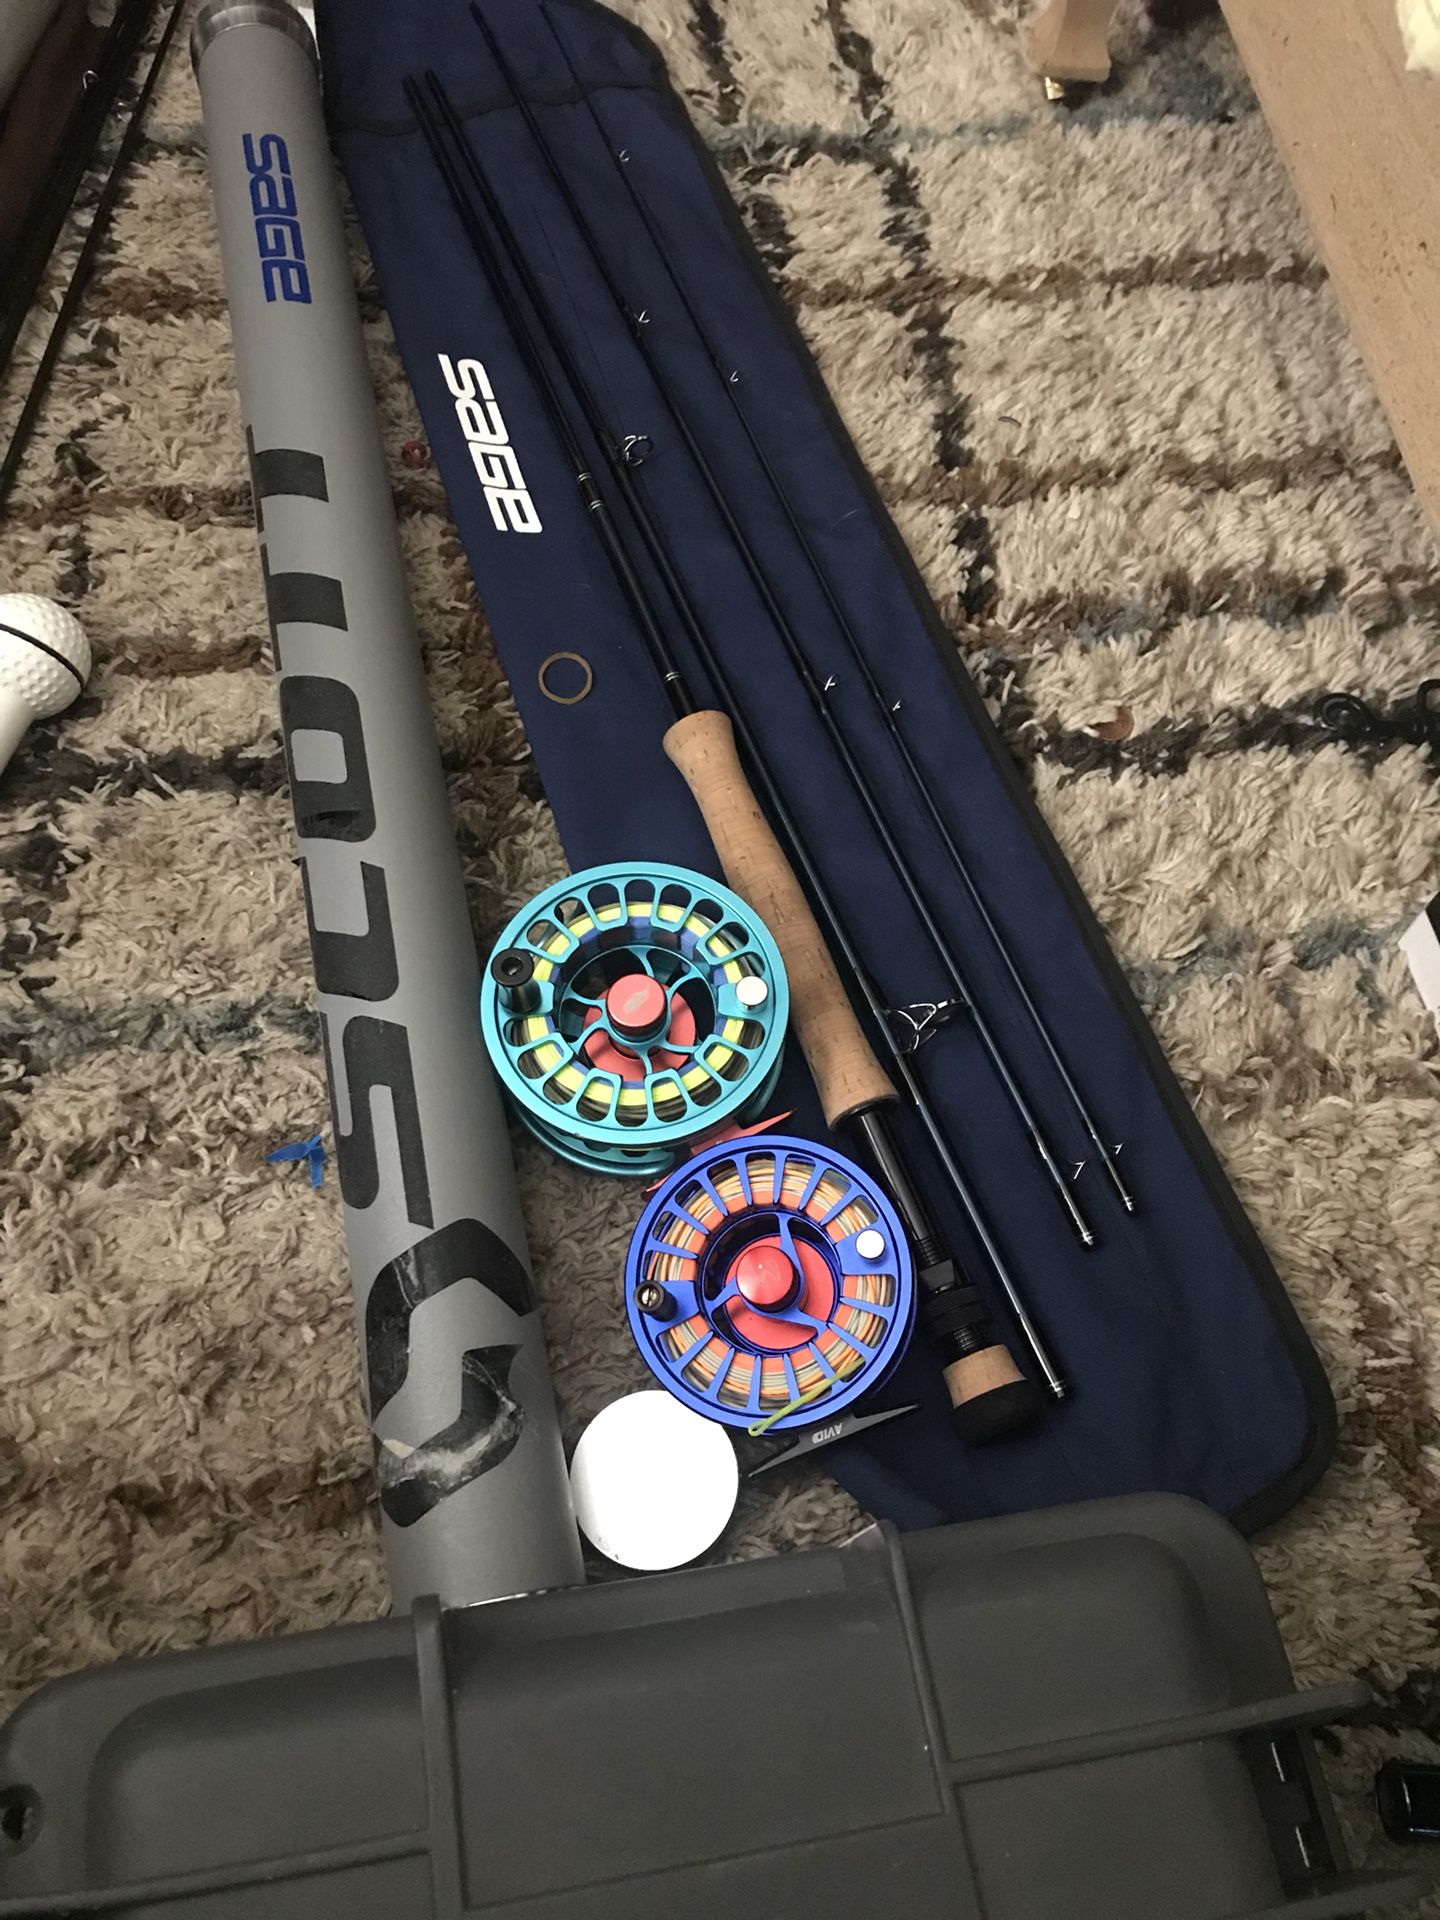 9 weight 9 foot sage fly rod with both reels ones a Allen actually both Allen’s brand